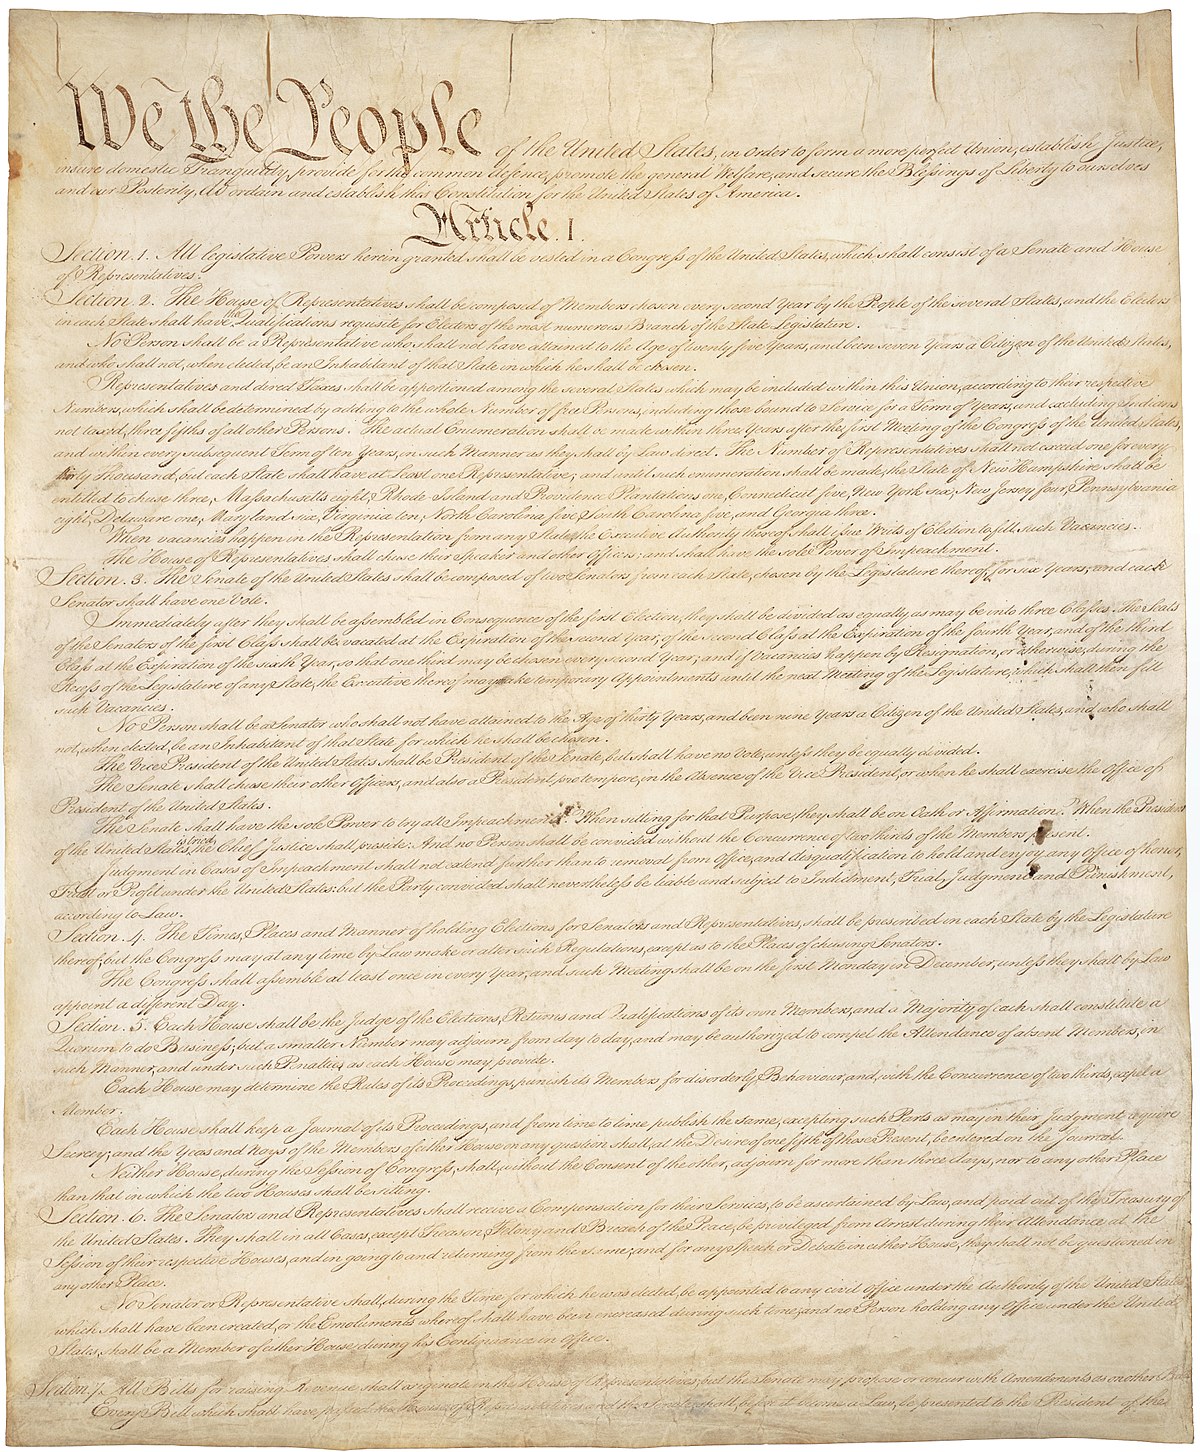 1200px-Constitution_of_the_United_States,_page_1